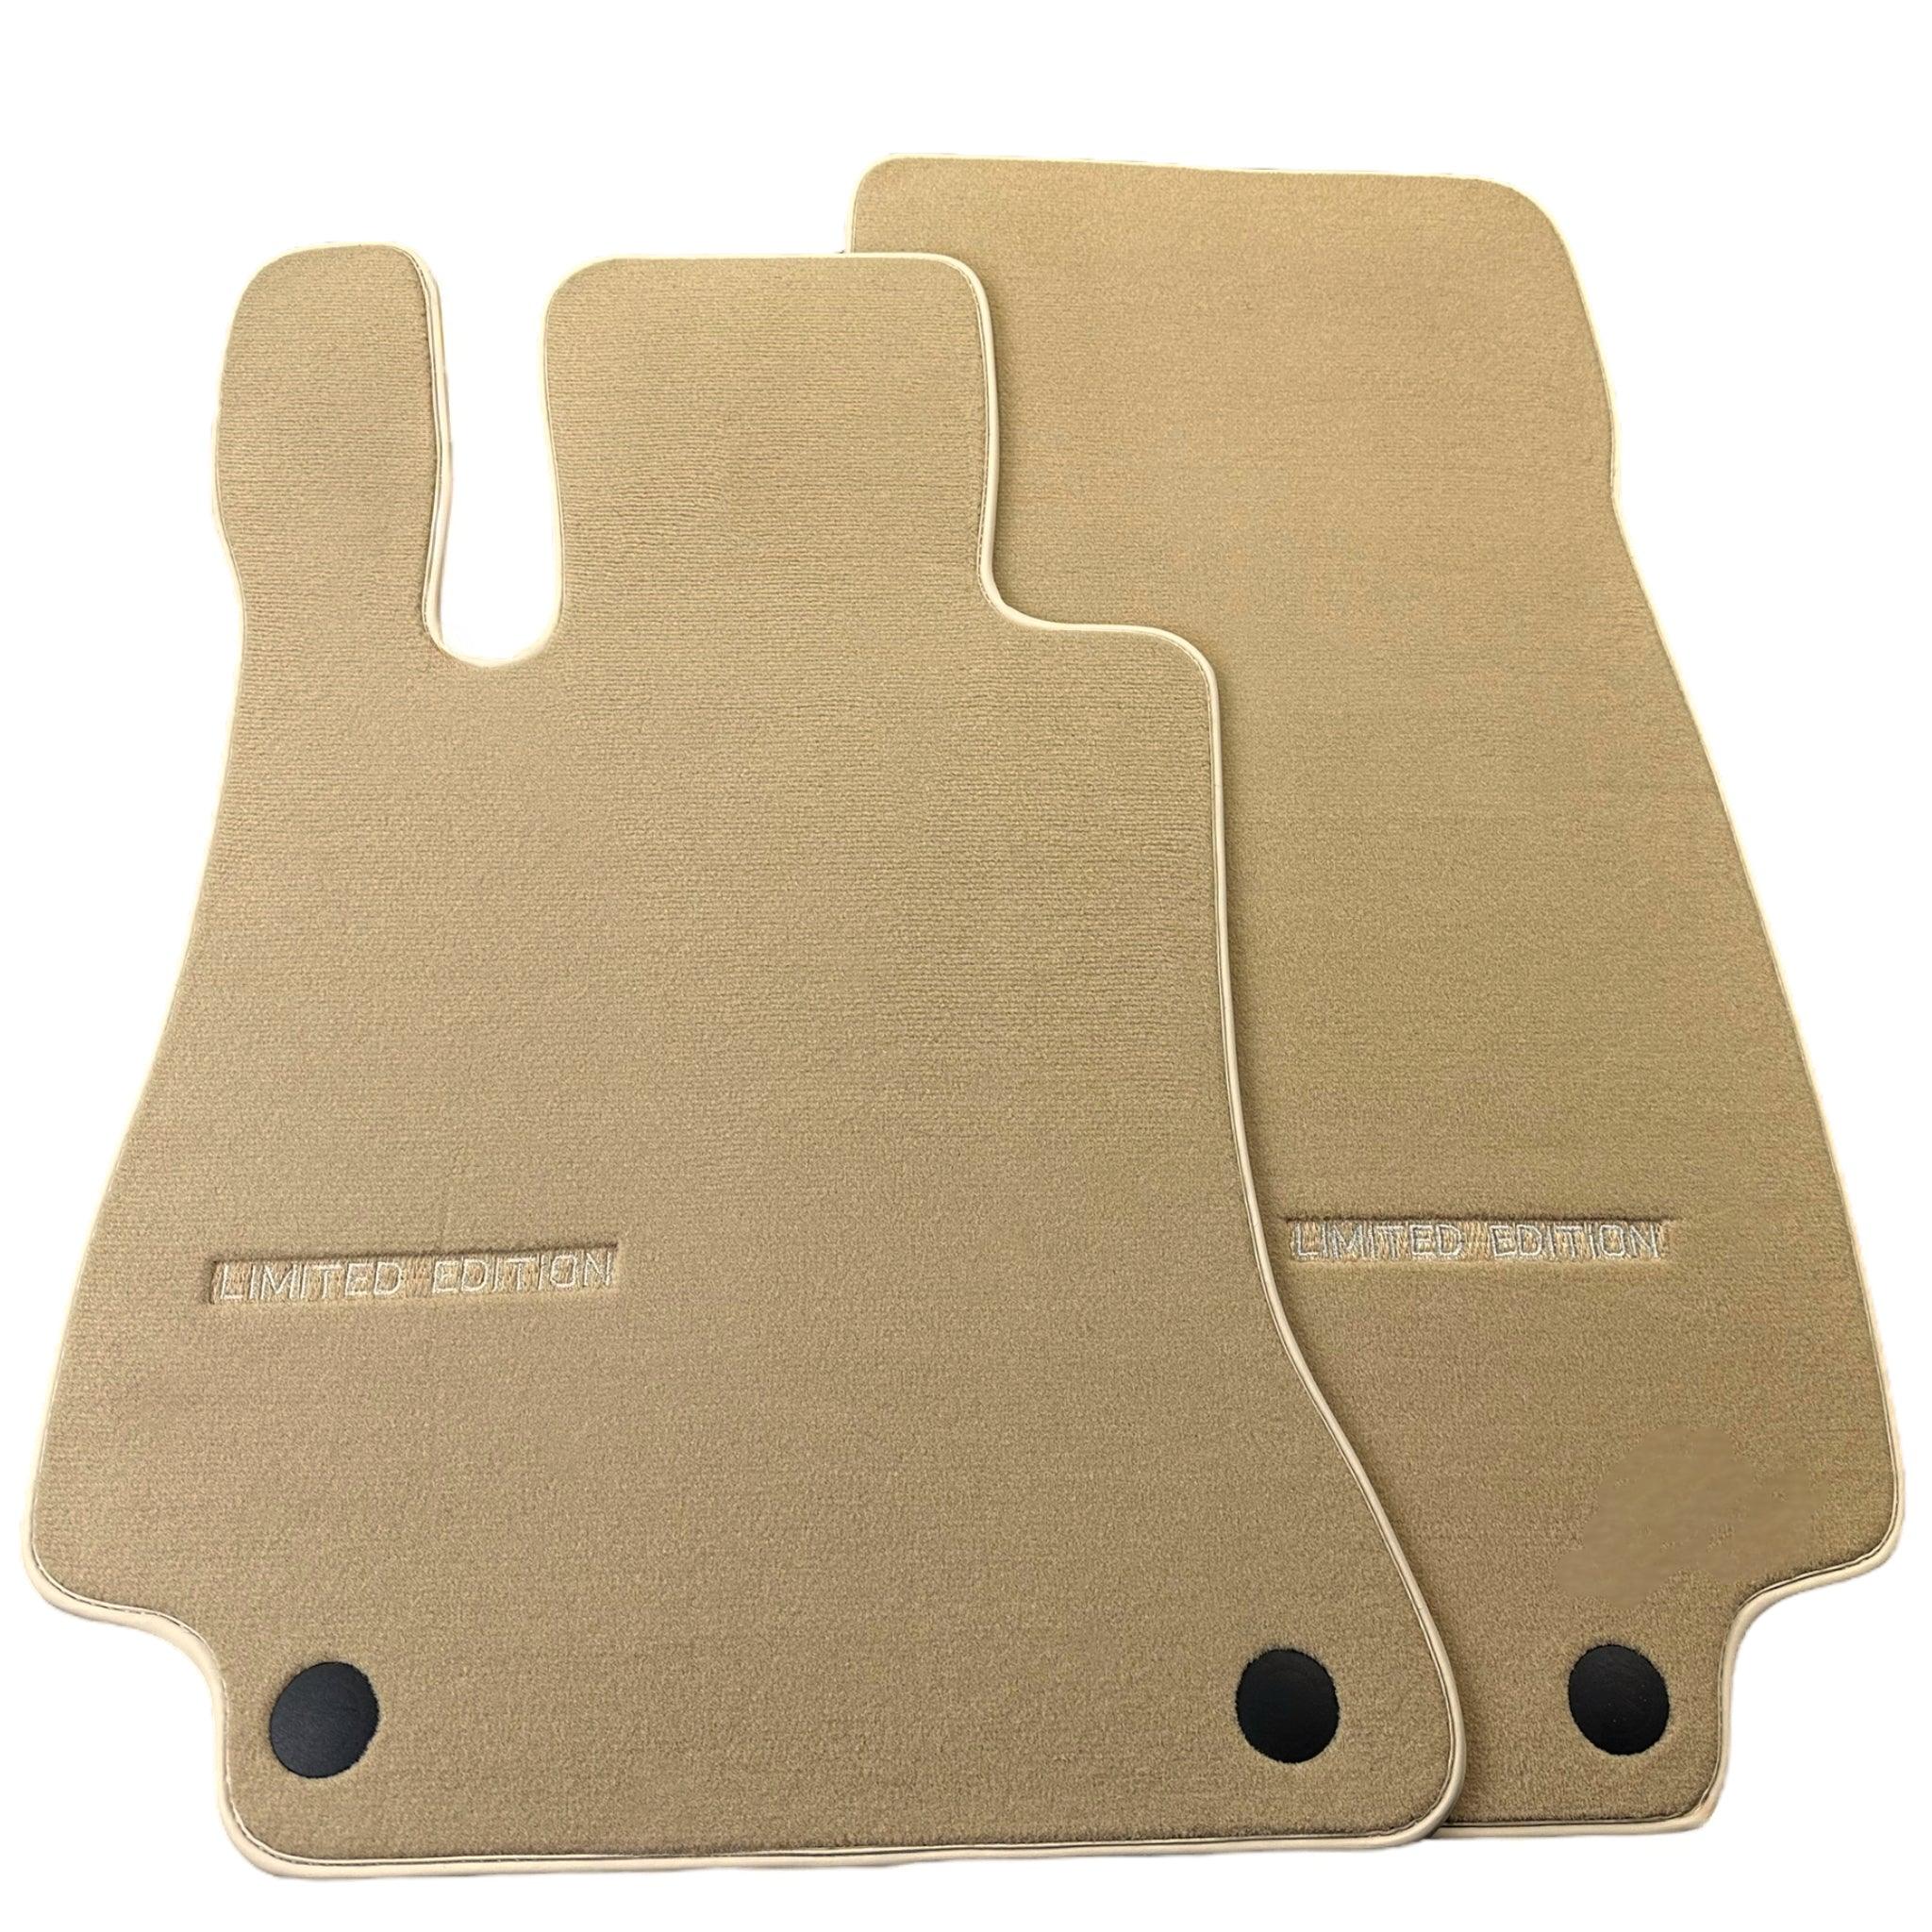 Beige Floor Mats For Mercedes Benz S-Class W126 (1979-1991) | Limited Edition